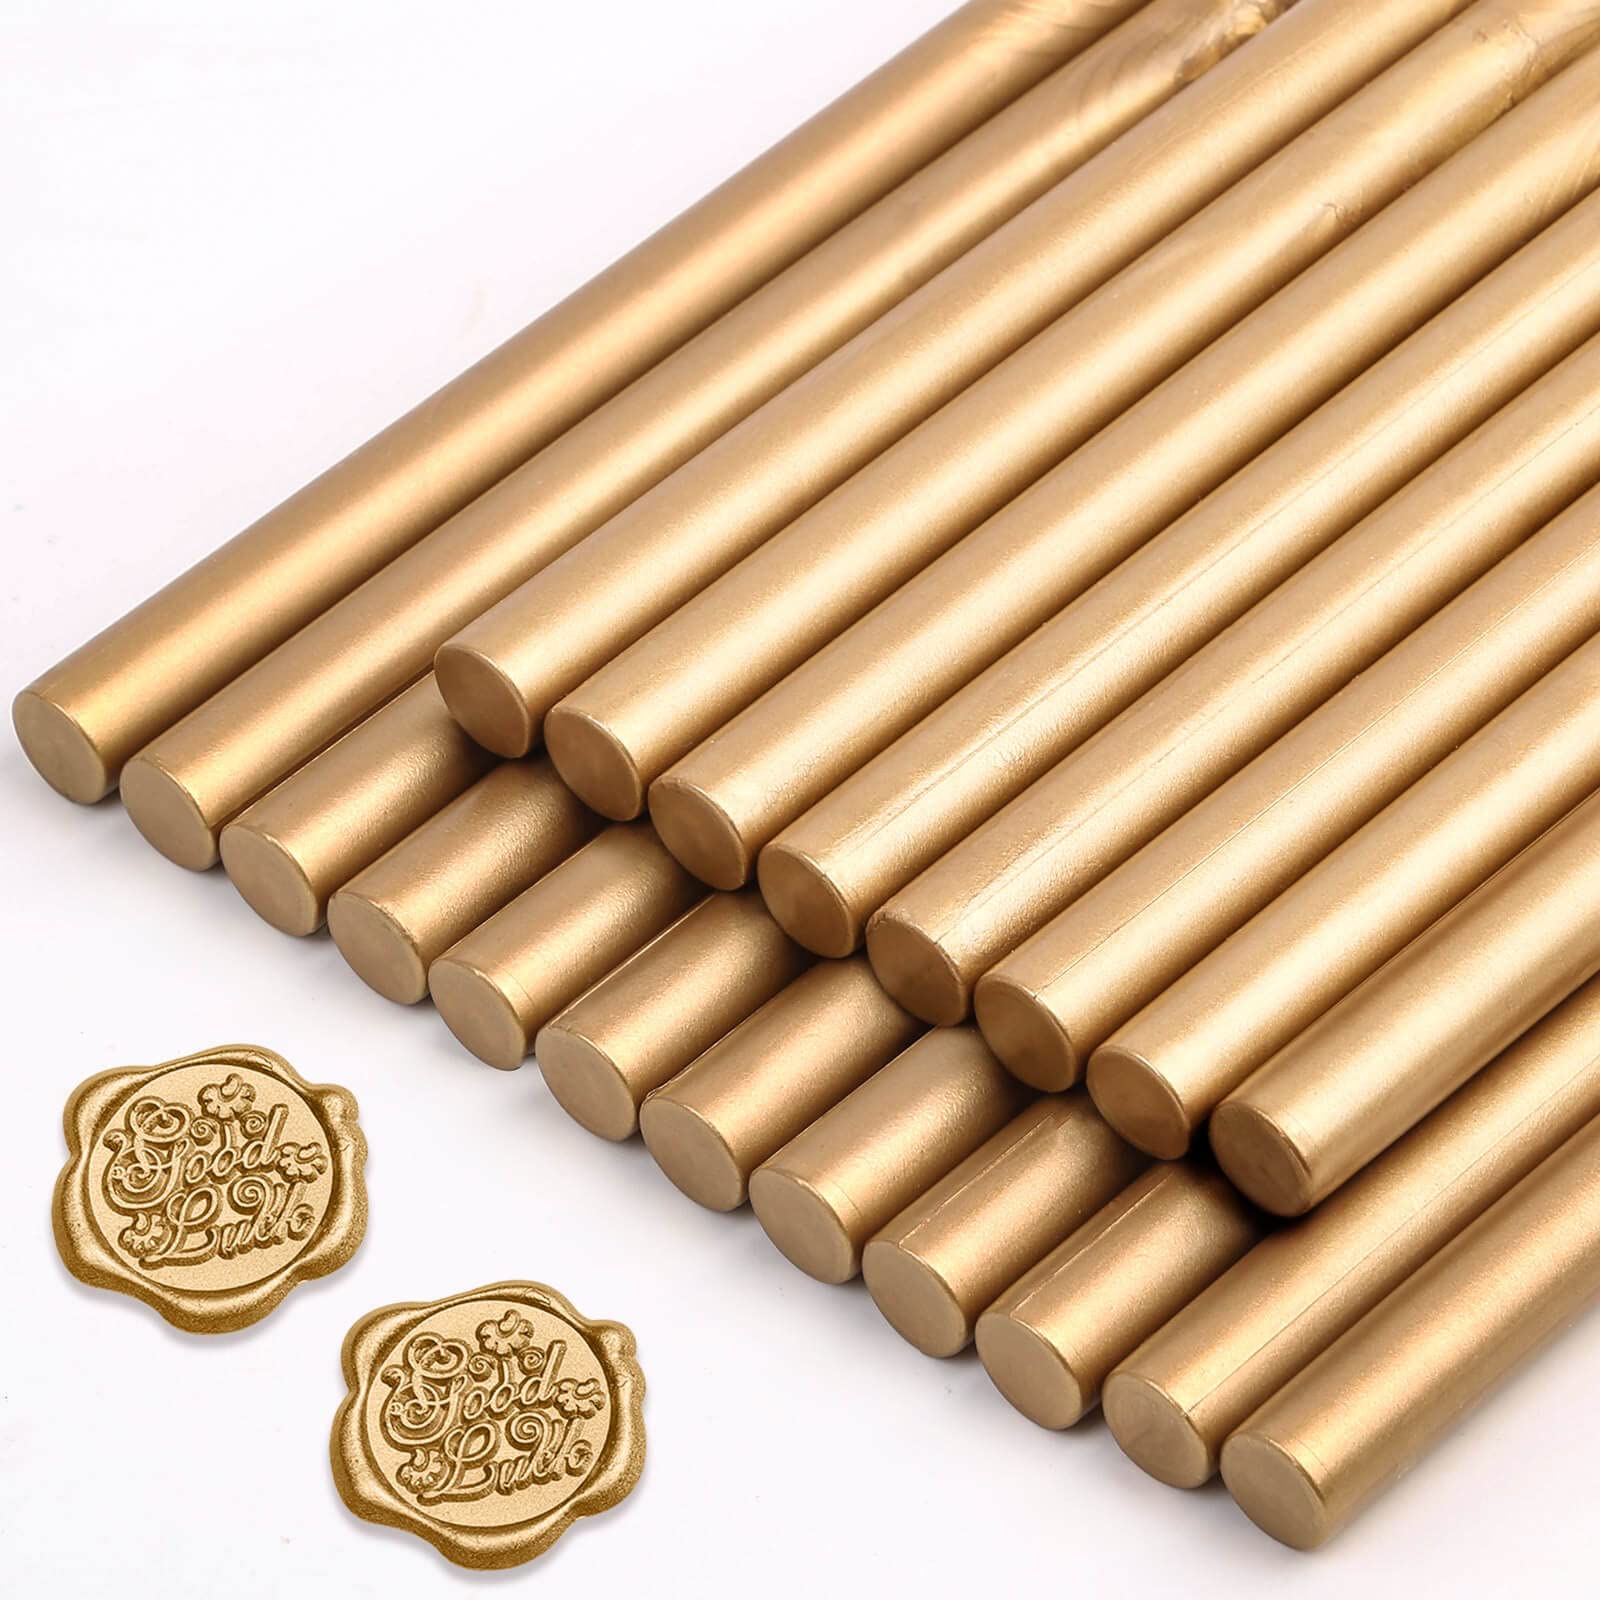  Antique Gold Wax Seal Sticks 20pcs, Andotopee Glue Gun Wax  Seal Sticks For Wax Seal Stamp, Premium Sealing Wax For Envelope Letter  Seal Wedding Invation Craft Adhesive, Great Gift Ideas